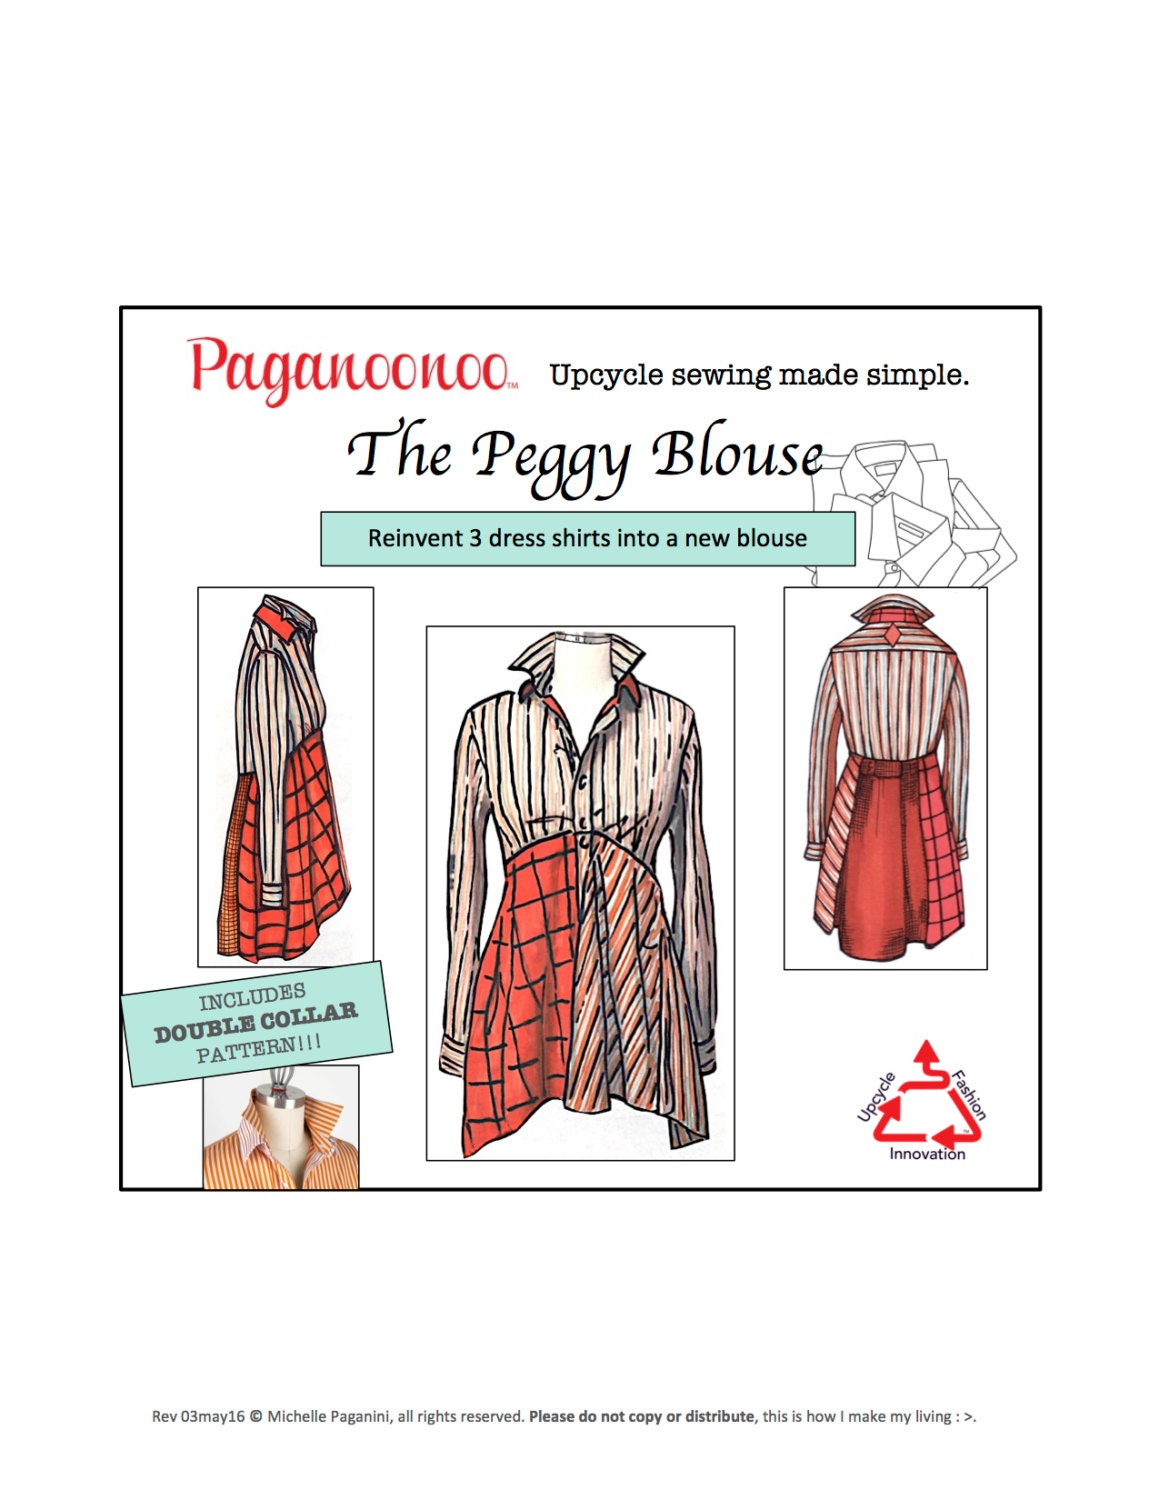 PDF: Paganoonoo Peggy Blouse Pattern with Double by Paganoonoo